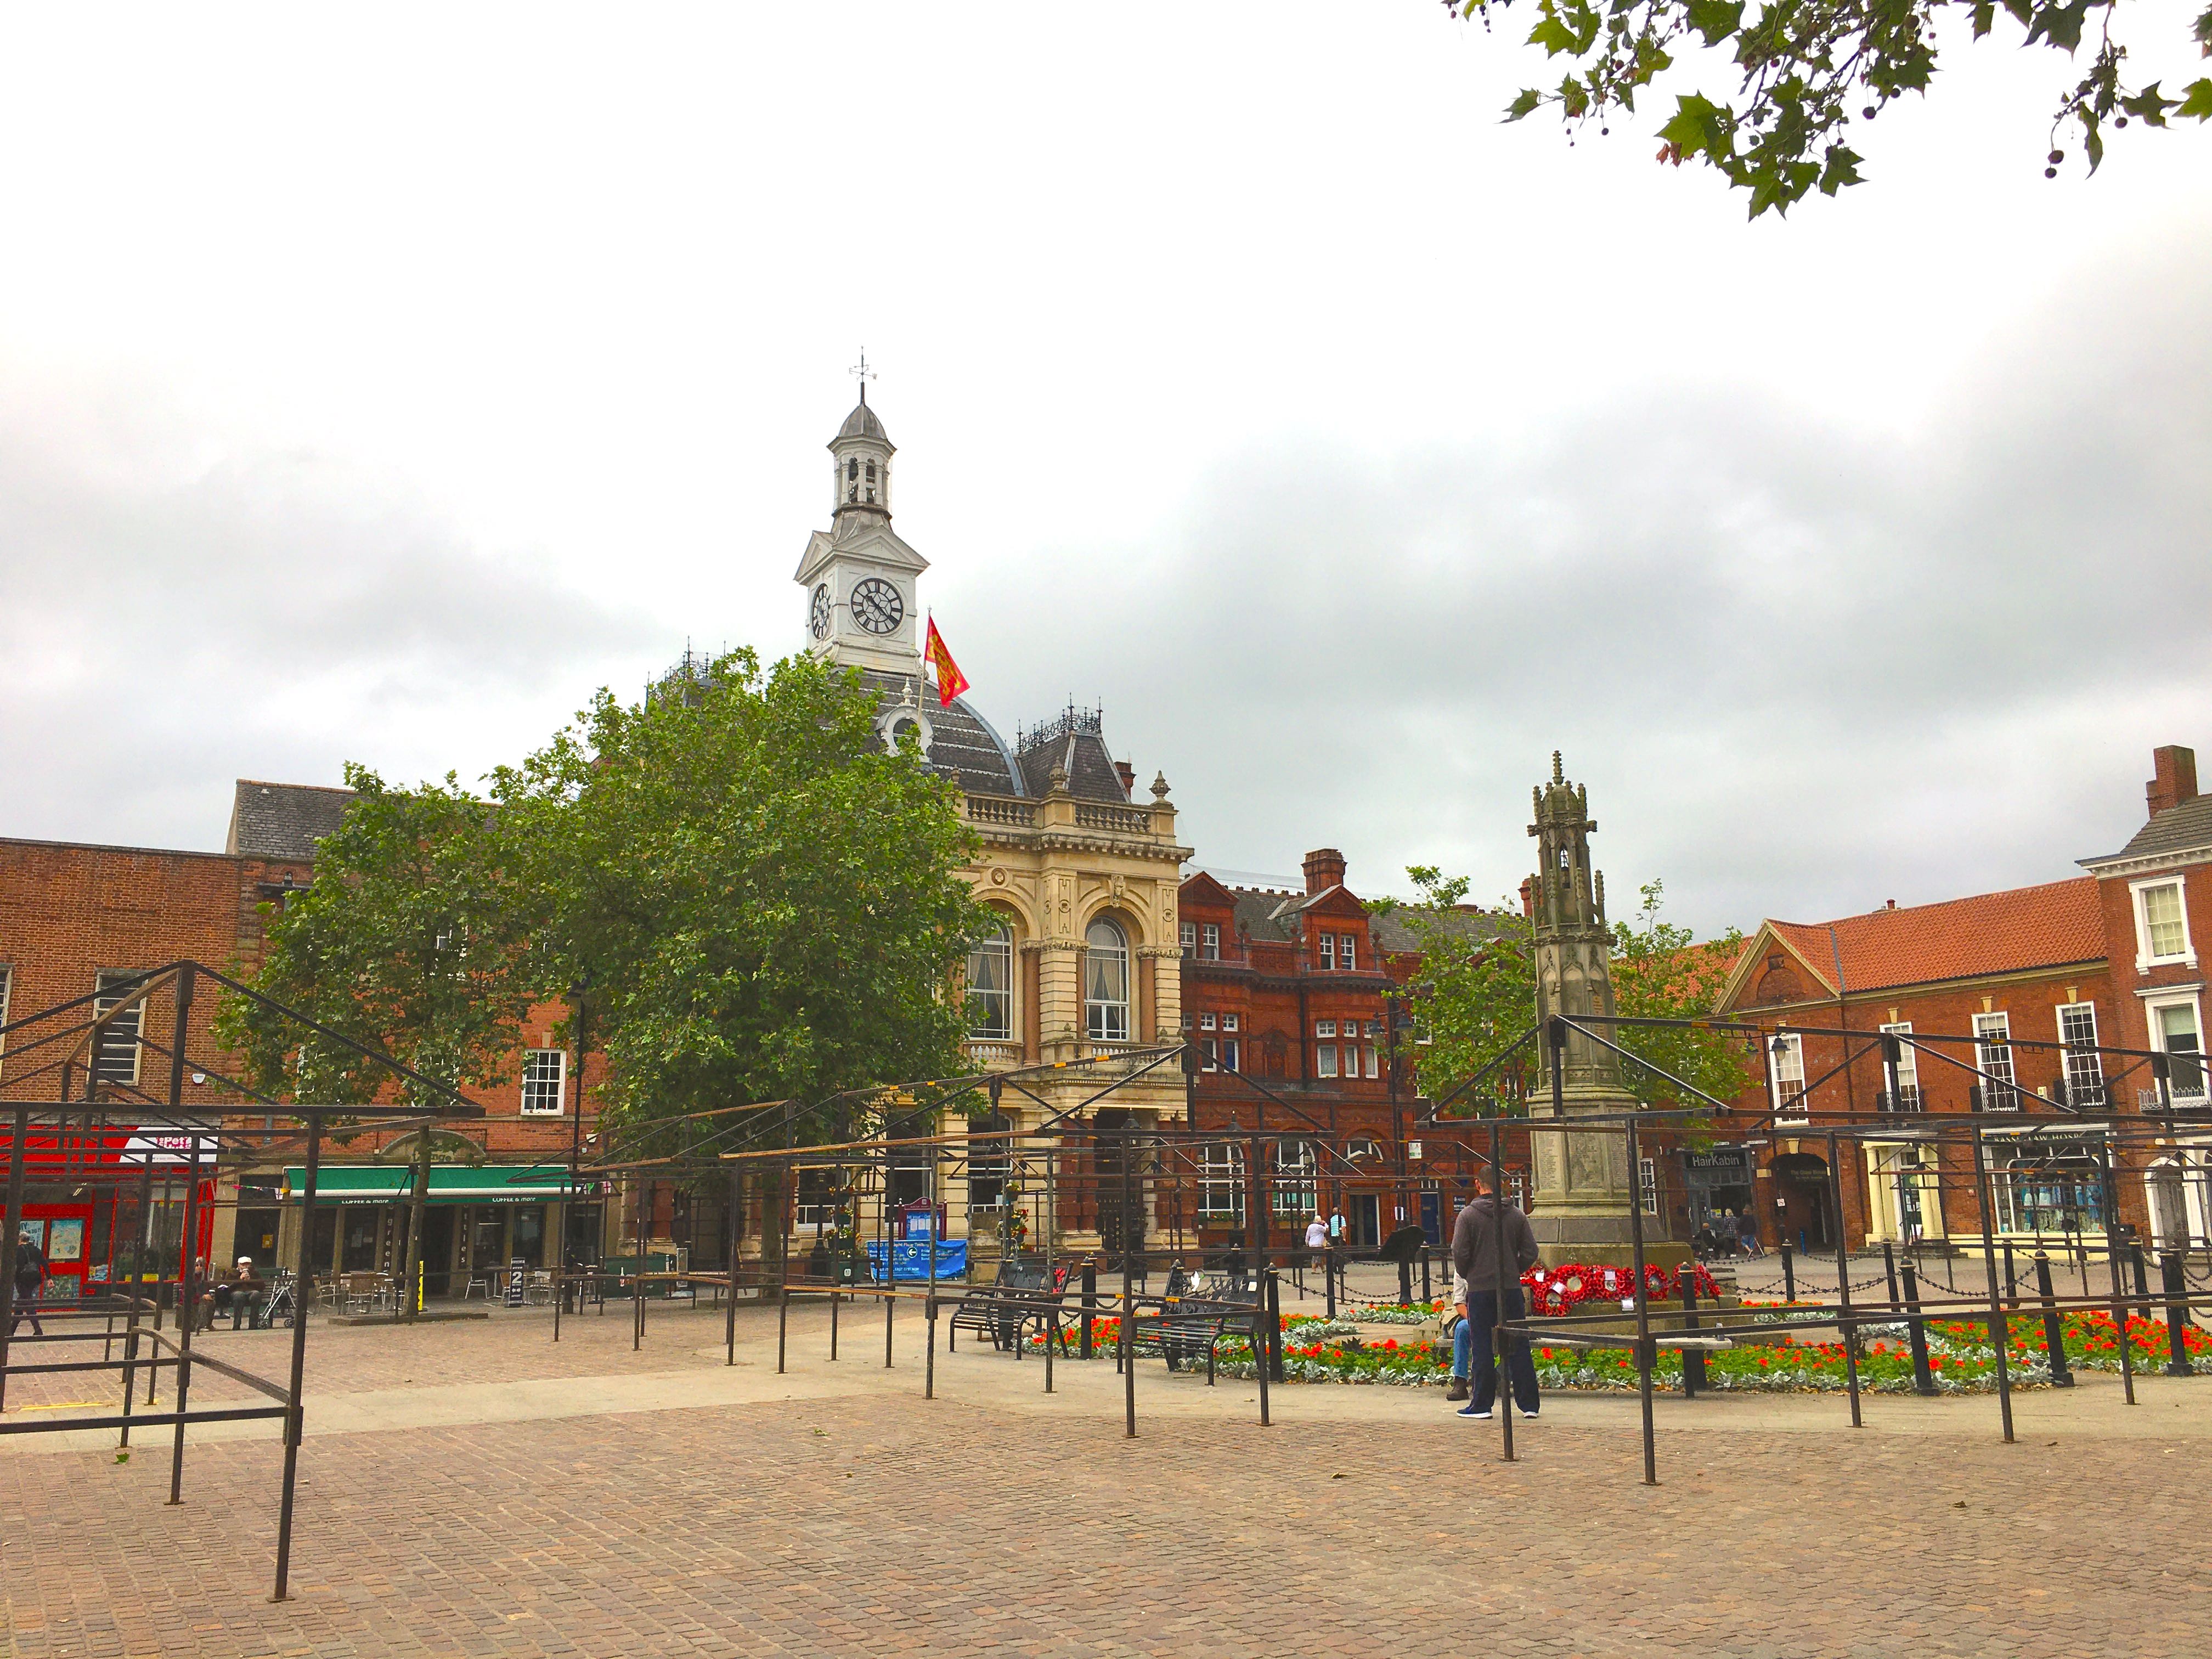 Retford town hall and market square